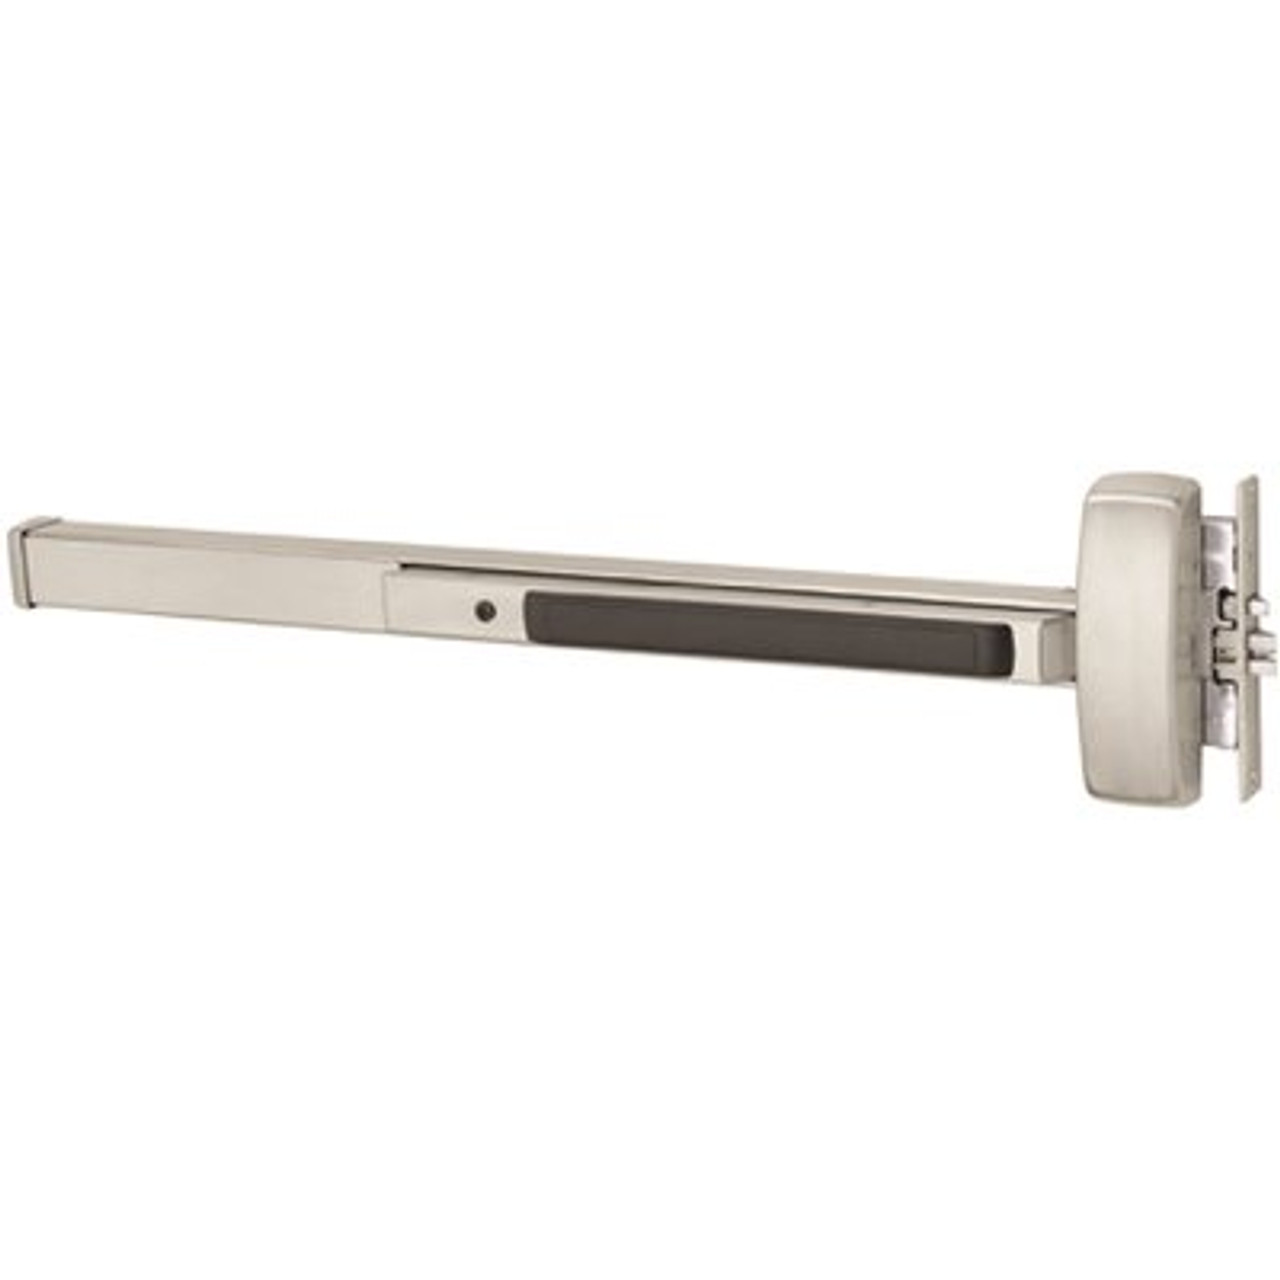 Sargent 80 Series Grade 1,36 In. Stainless Steel Finish Left Hand Reverse Mortise Exit Device, Exit Only